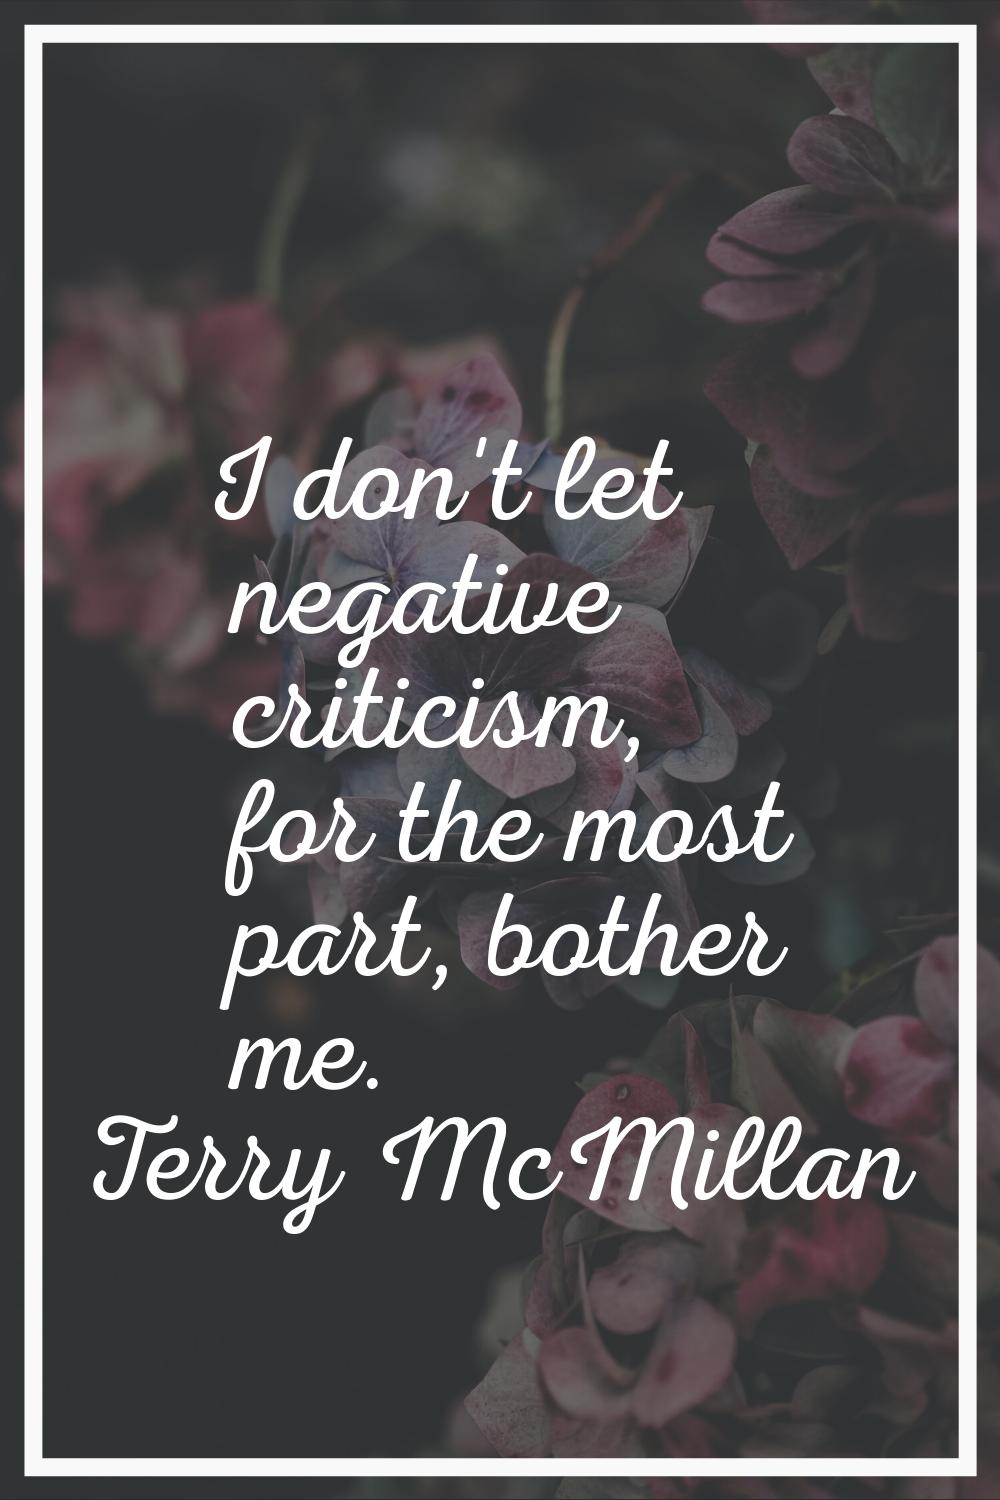 I don't let negative criticism, for the most part, bother me.